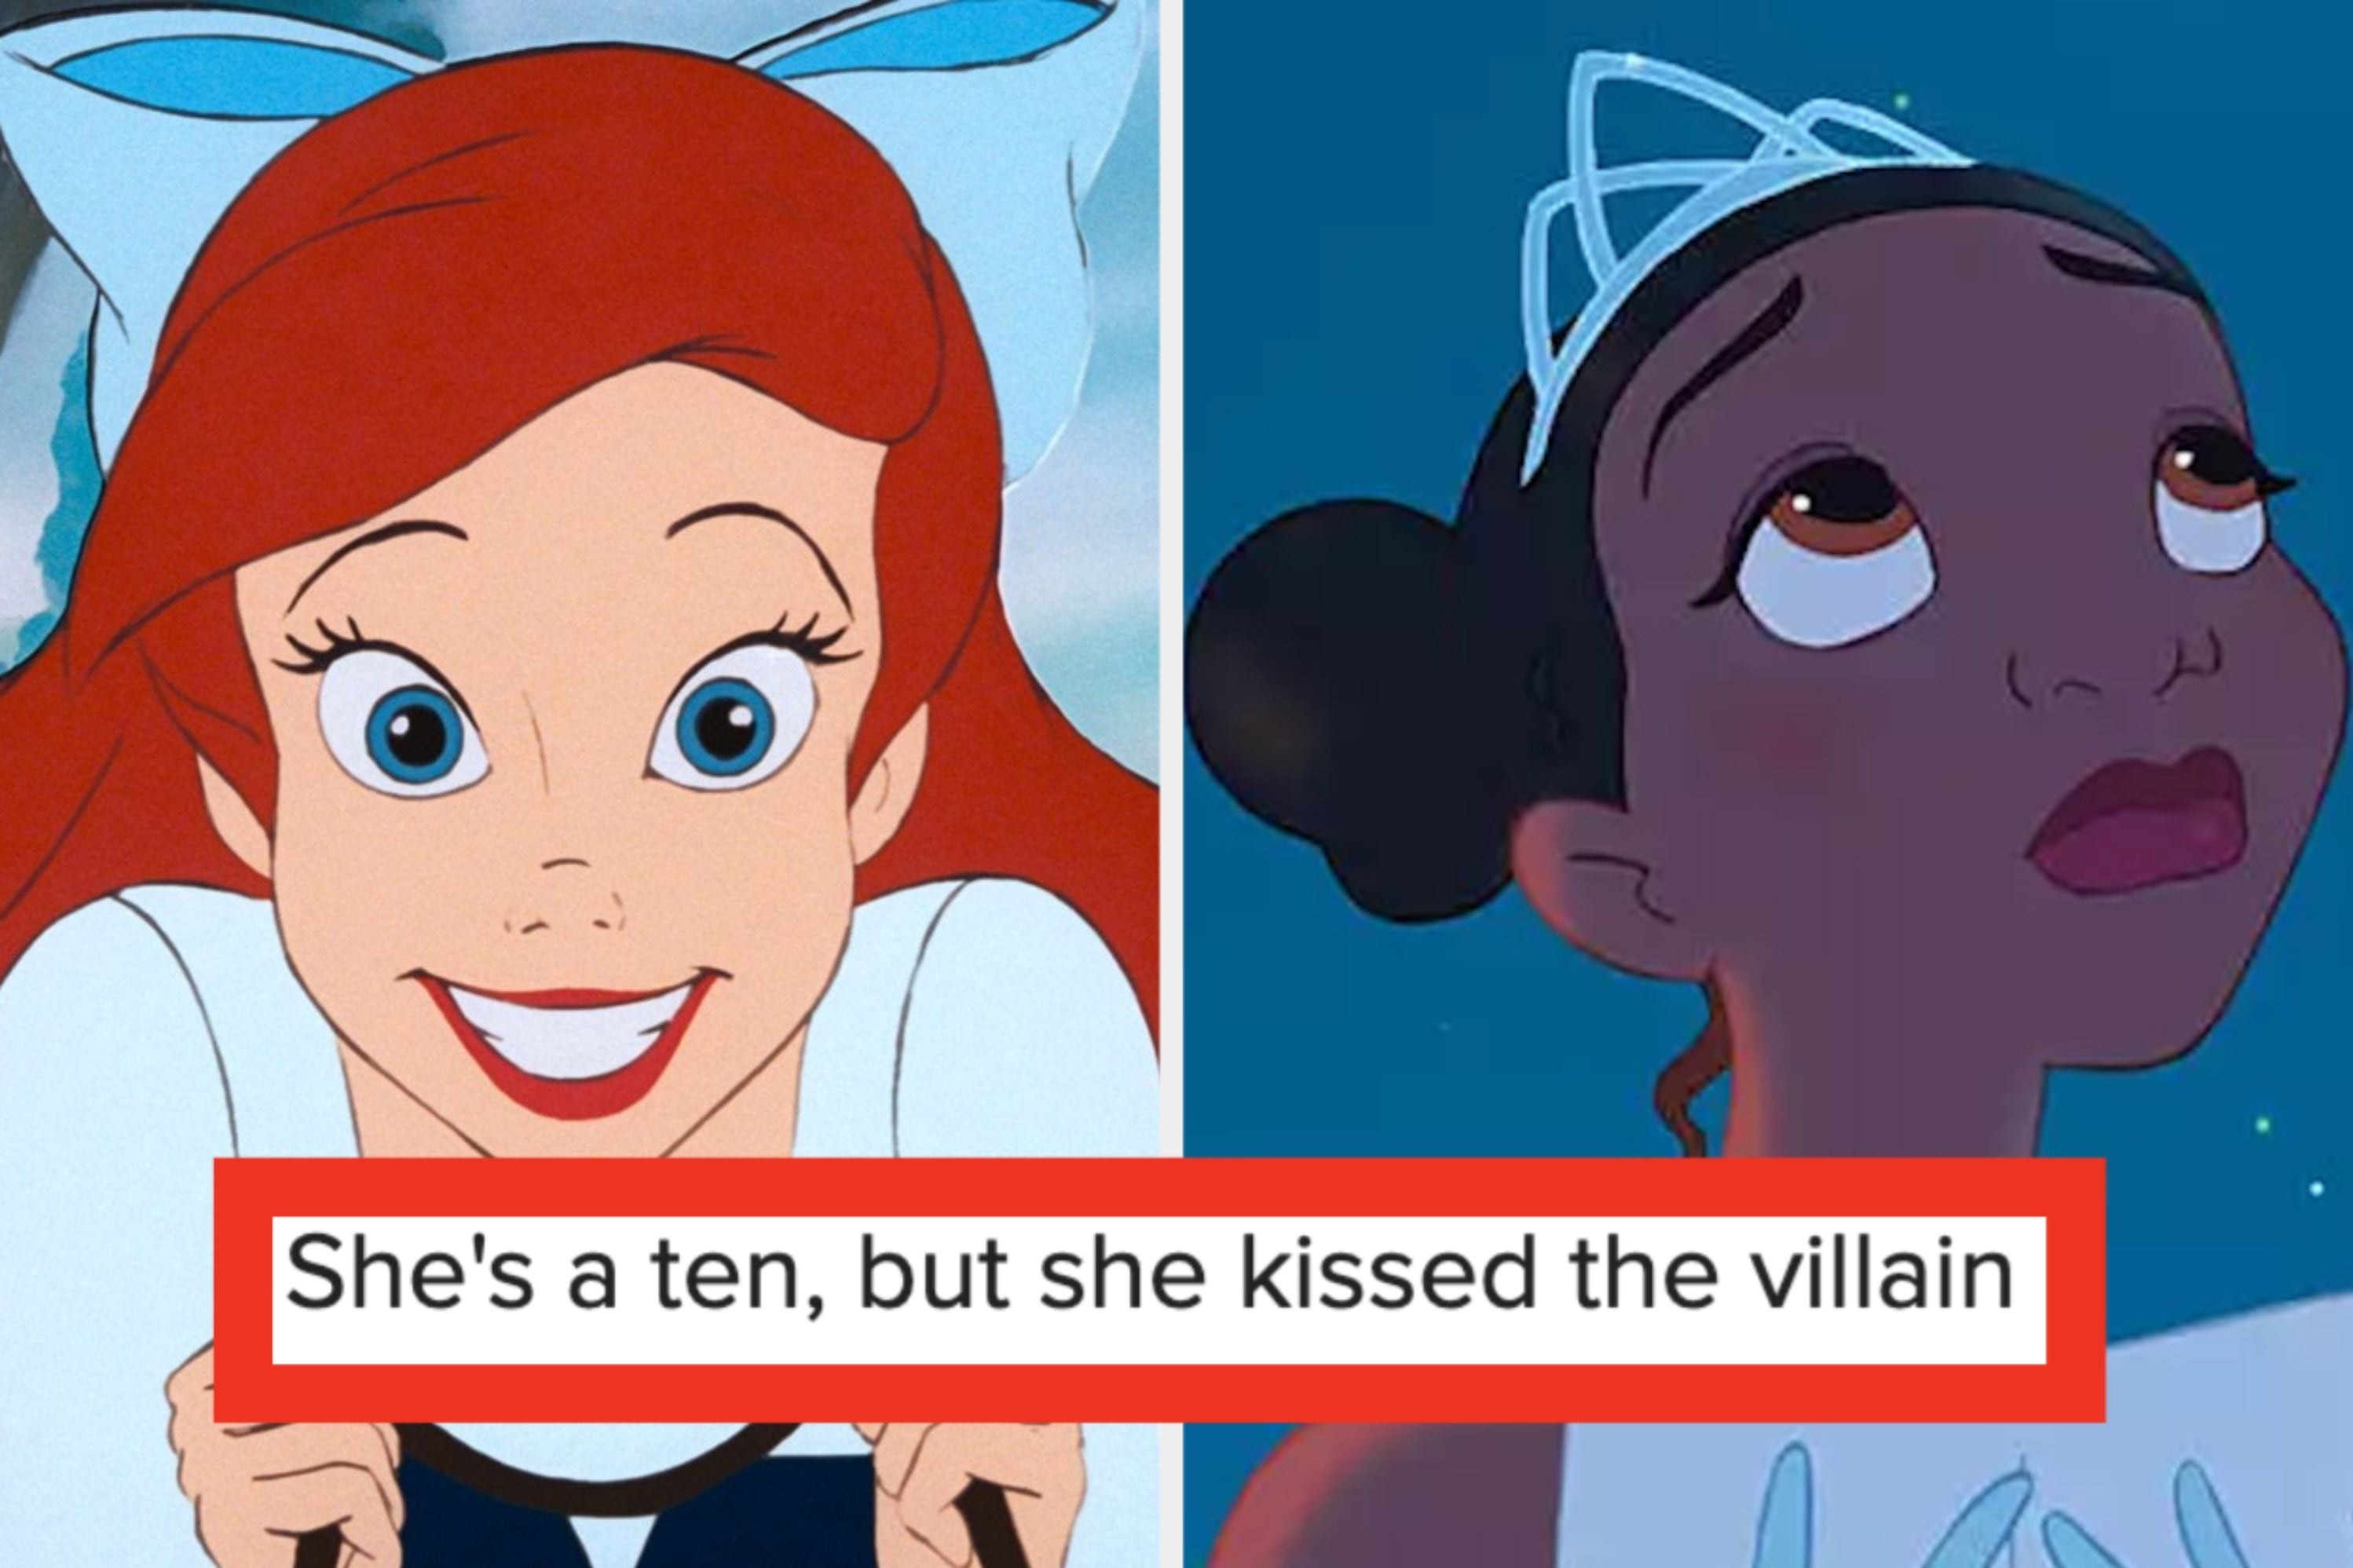 Two images: on the left, an image of Ariel and on the right, an image of Tiana. On top of both images, the text &quot;She&#x27;s a ten, but she kissed the villain&quot; is overlayed.